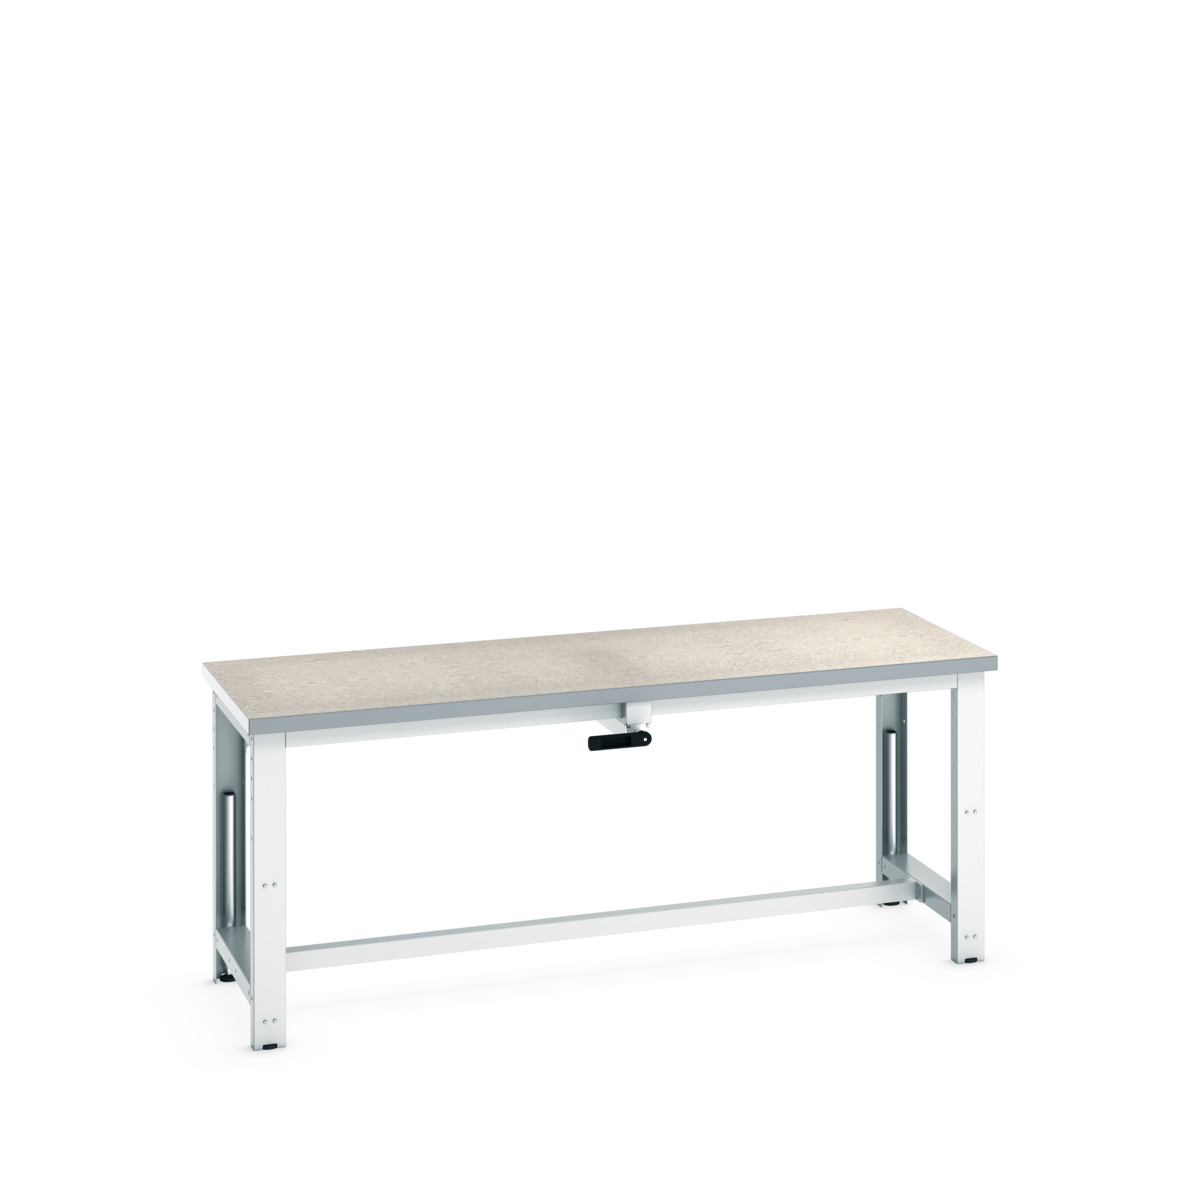 41003573. - cubio stepless adjustable height bench